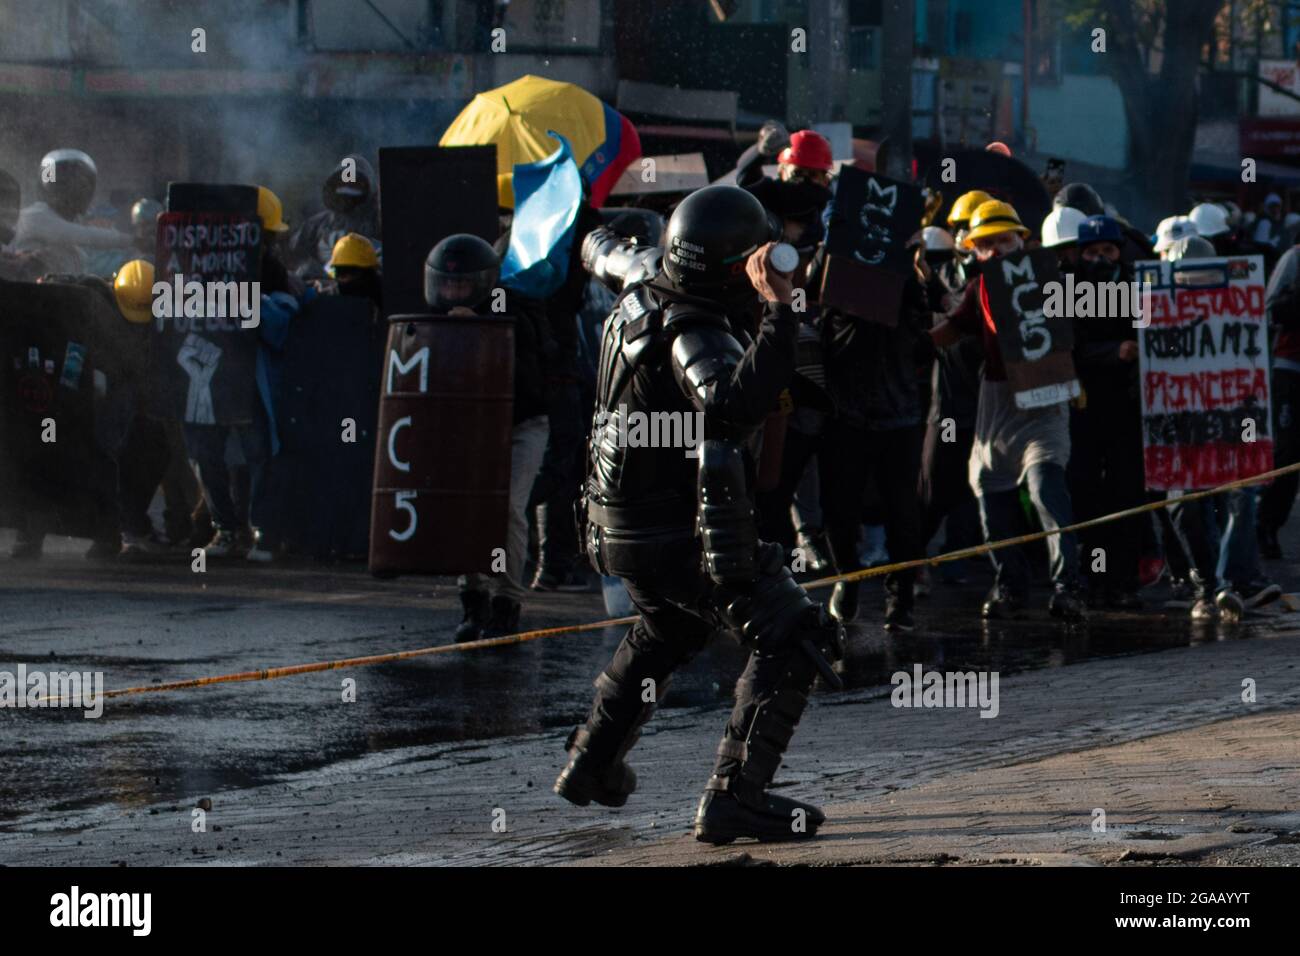 Medellin, Colombia. 28th July, 2021. A Colombia's riot police officer throws a tear gas grenade to demonstrators as demonstrations ended in late-night clashes between Colombia's riot police (ESMAD) and Demonstrators as Colombia marks 3 months of Anti-Government Protests against Colombia's president Ivan Duque government, and a new tax-reform amidst unrest and violence that left at least 83 dead since protests started. On July 28, 2021 in Medellin - Antioquia, Colombia. Credit: Long Visual Press/Alamy Live News Stock Photo